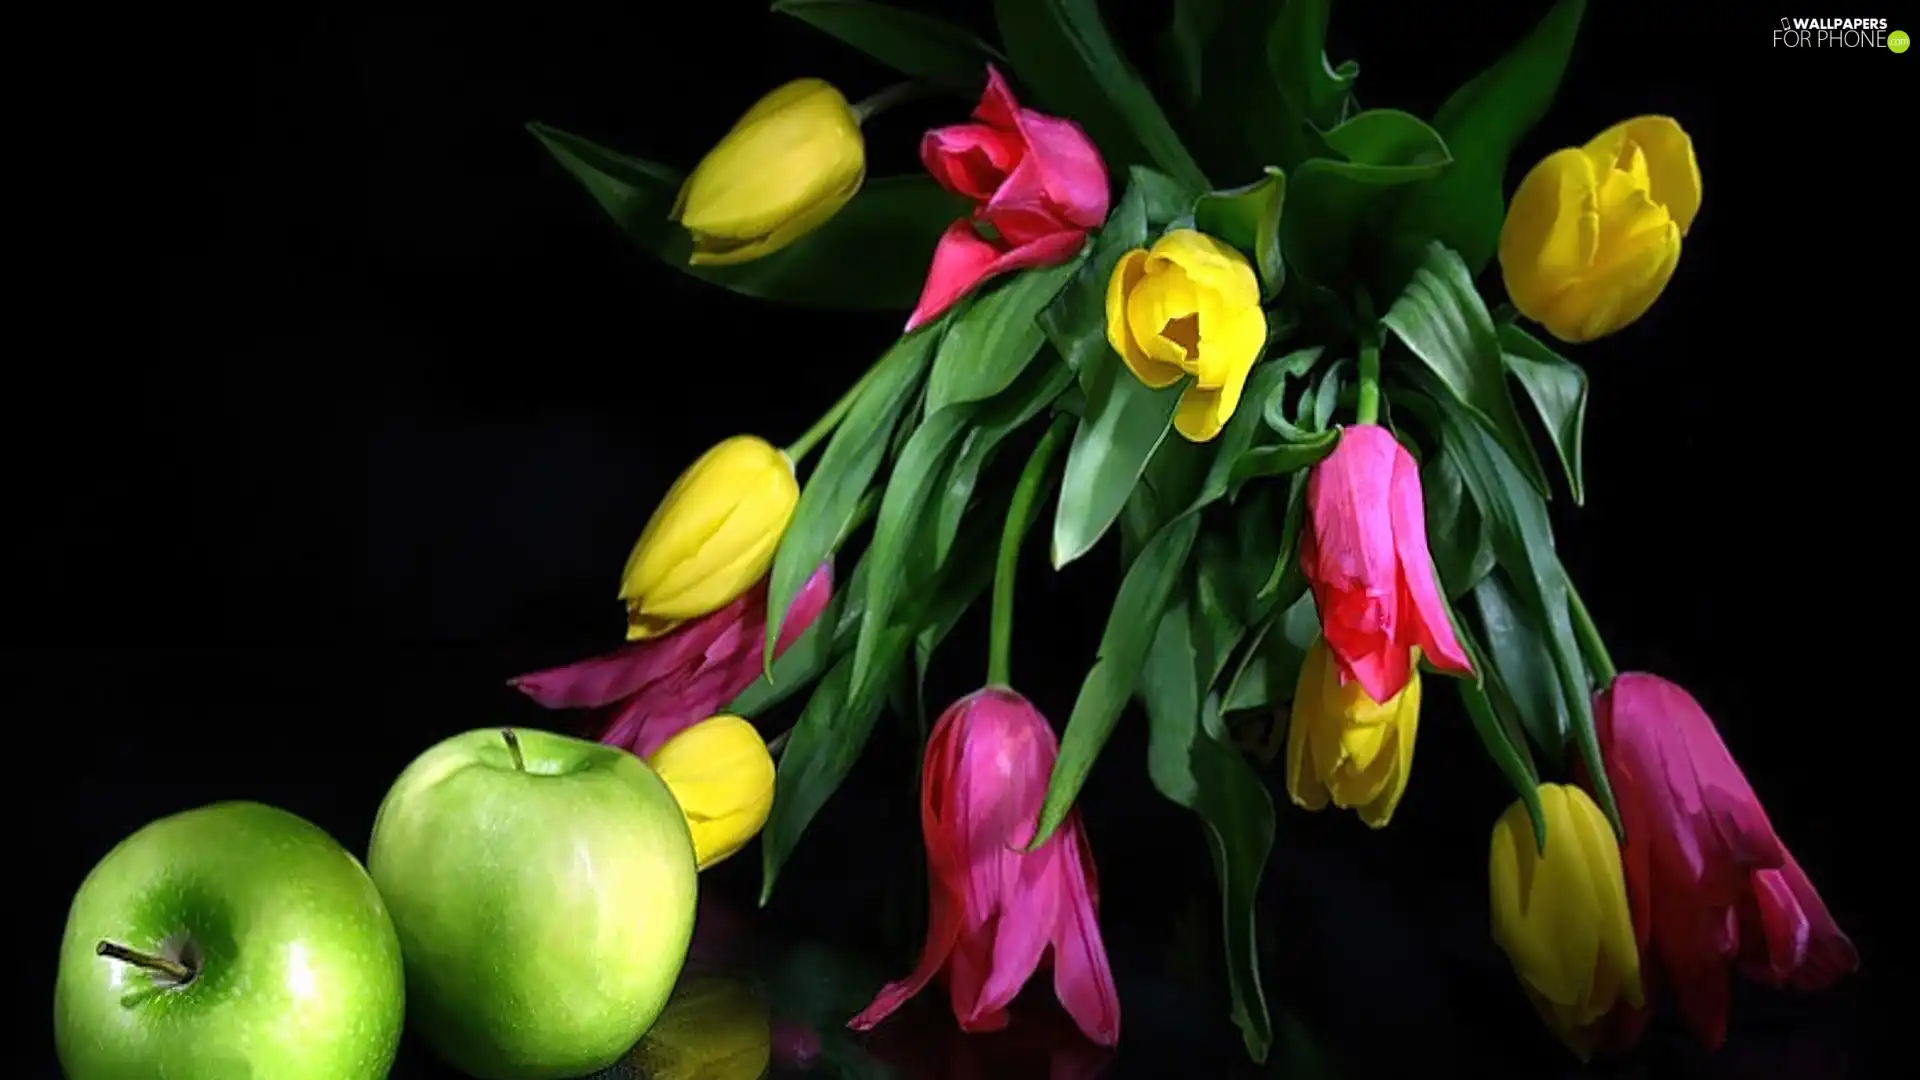 color, green ones, apples, Tulips